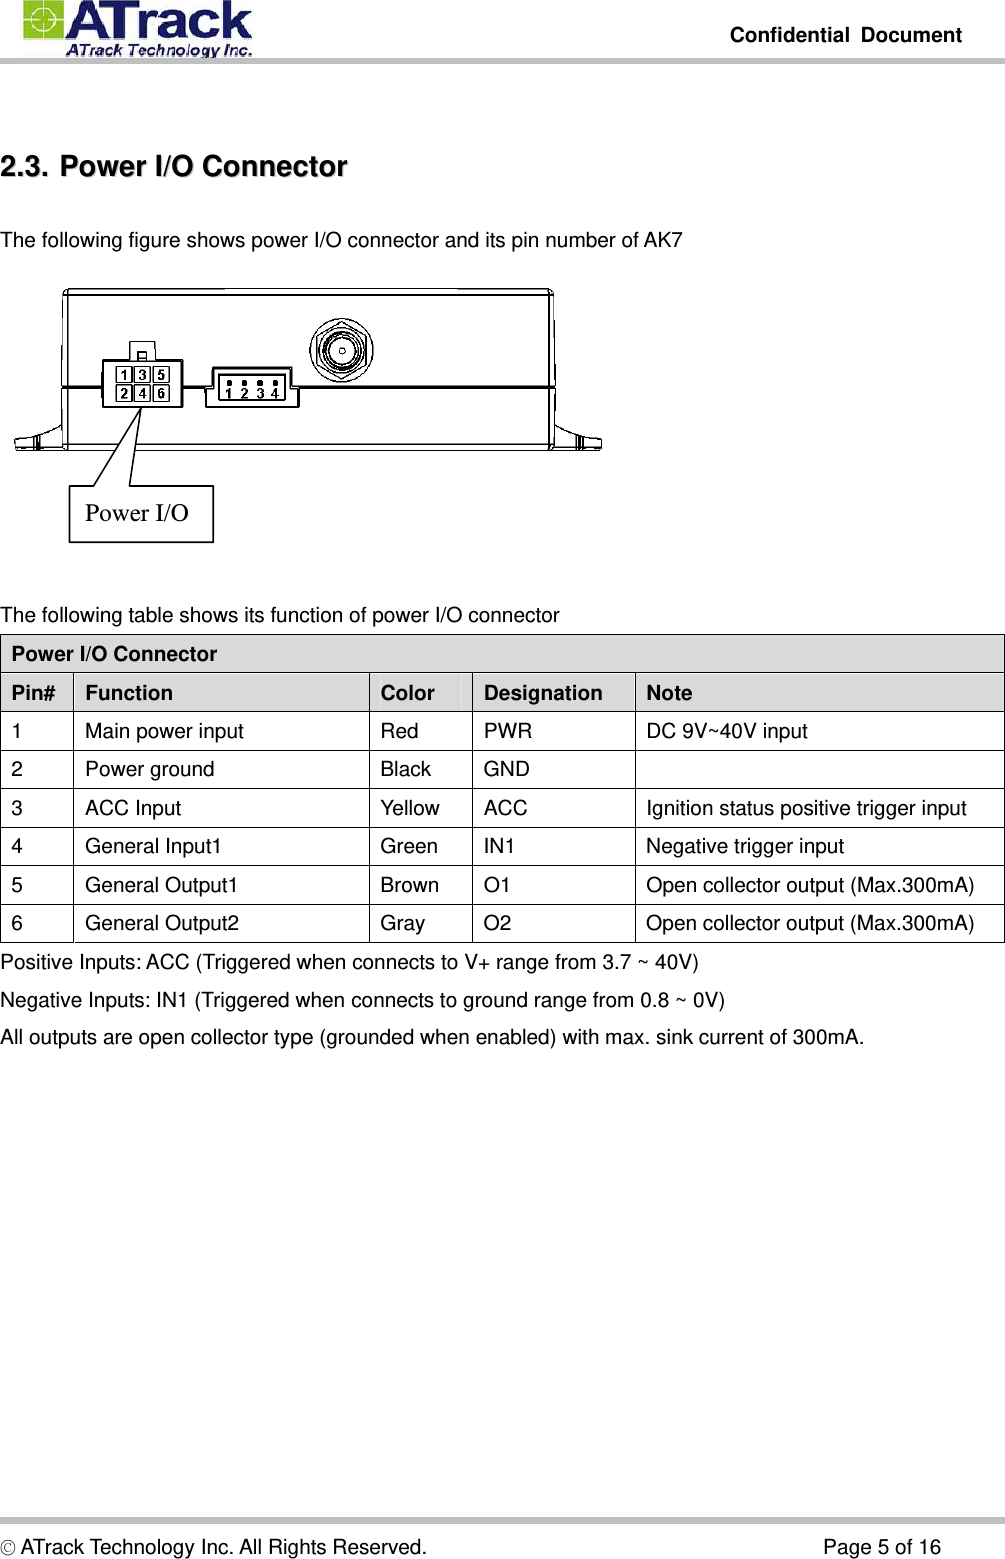         Confidential Document  © ATrack Technology Inc. All Rights Reserved.                                      Page 5 of 16  22..33..  PPoowweerr  II//OO  CCoonnnneeccttoorr  The following figure shows power I/O connector and its pin number of AK7     The following table shows its function of power I/O connector Power I/O Connector Pin#  Function  Color  Designation  Note 1  Main power input  Red  PWR  DC 9V~40V input 2 Power ground  Black GND   3  ACC Input  Yellow  ACC  Ignition status positive trigger input 4  General Input1  Green  IN1  Negative trigger input 5 General Output1  Brown O1  Open collector output (Max.300mA) 6  General Output2  Gray  O2  Open collector output (Max.300mA) Positive Inputs: ACC (Triggered when connects to V+ range from 3.7 ~ 40V) Negative Inputs: IN1 (Triggered when connects to ground range from 0.8 ~ 0V) All outputs are open collector type (grounded when enabled) with max. sink current of 300mA. Power I/O 